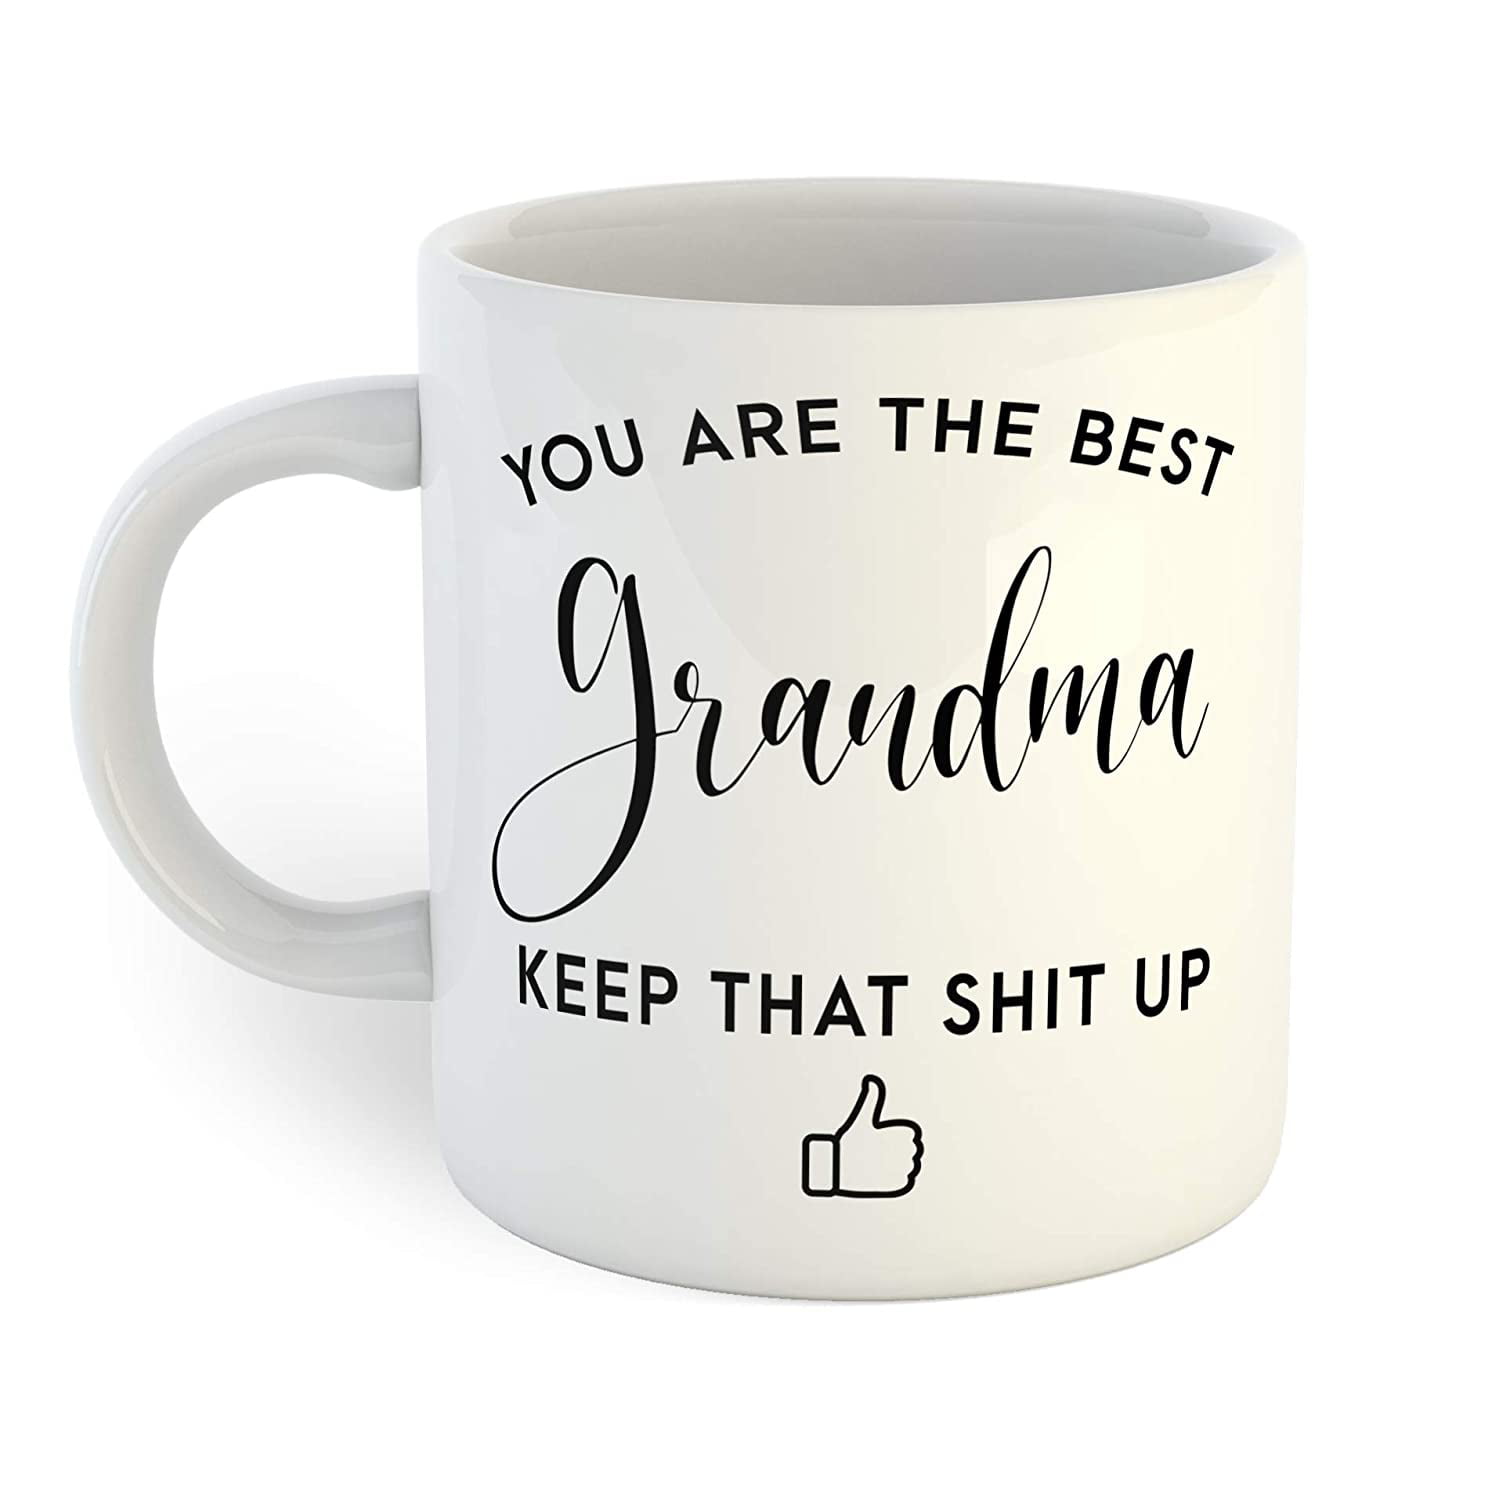 Details about   Grandma Granddaughter Gifts I am Your Grandson You Can't Do Coffee Mug Tea Cup 